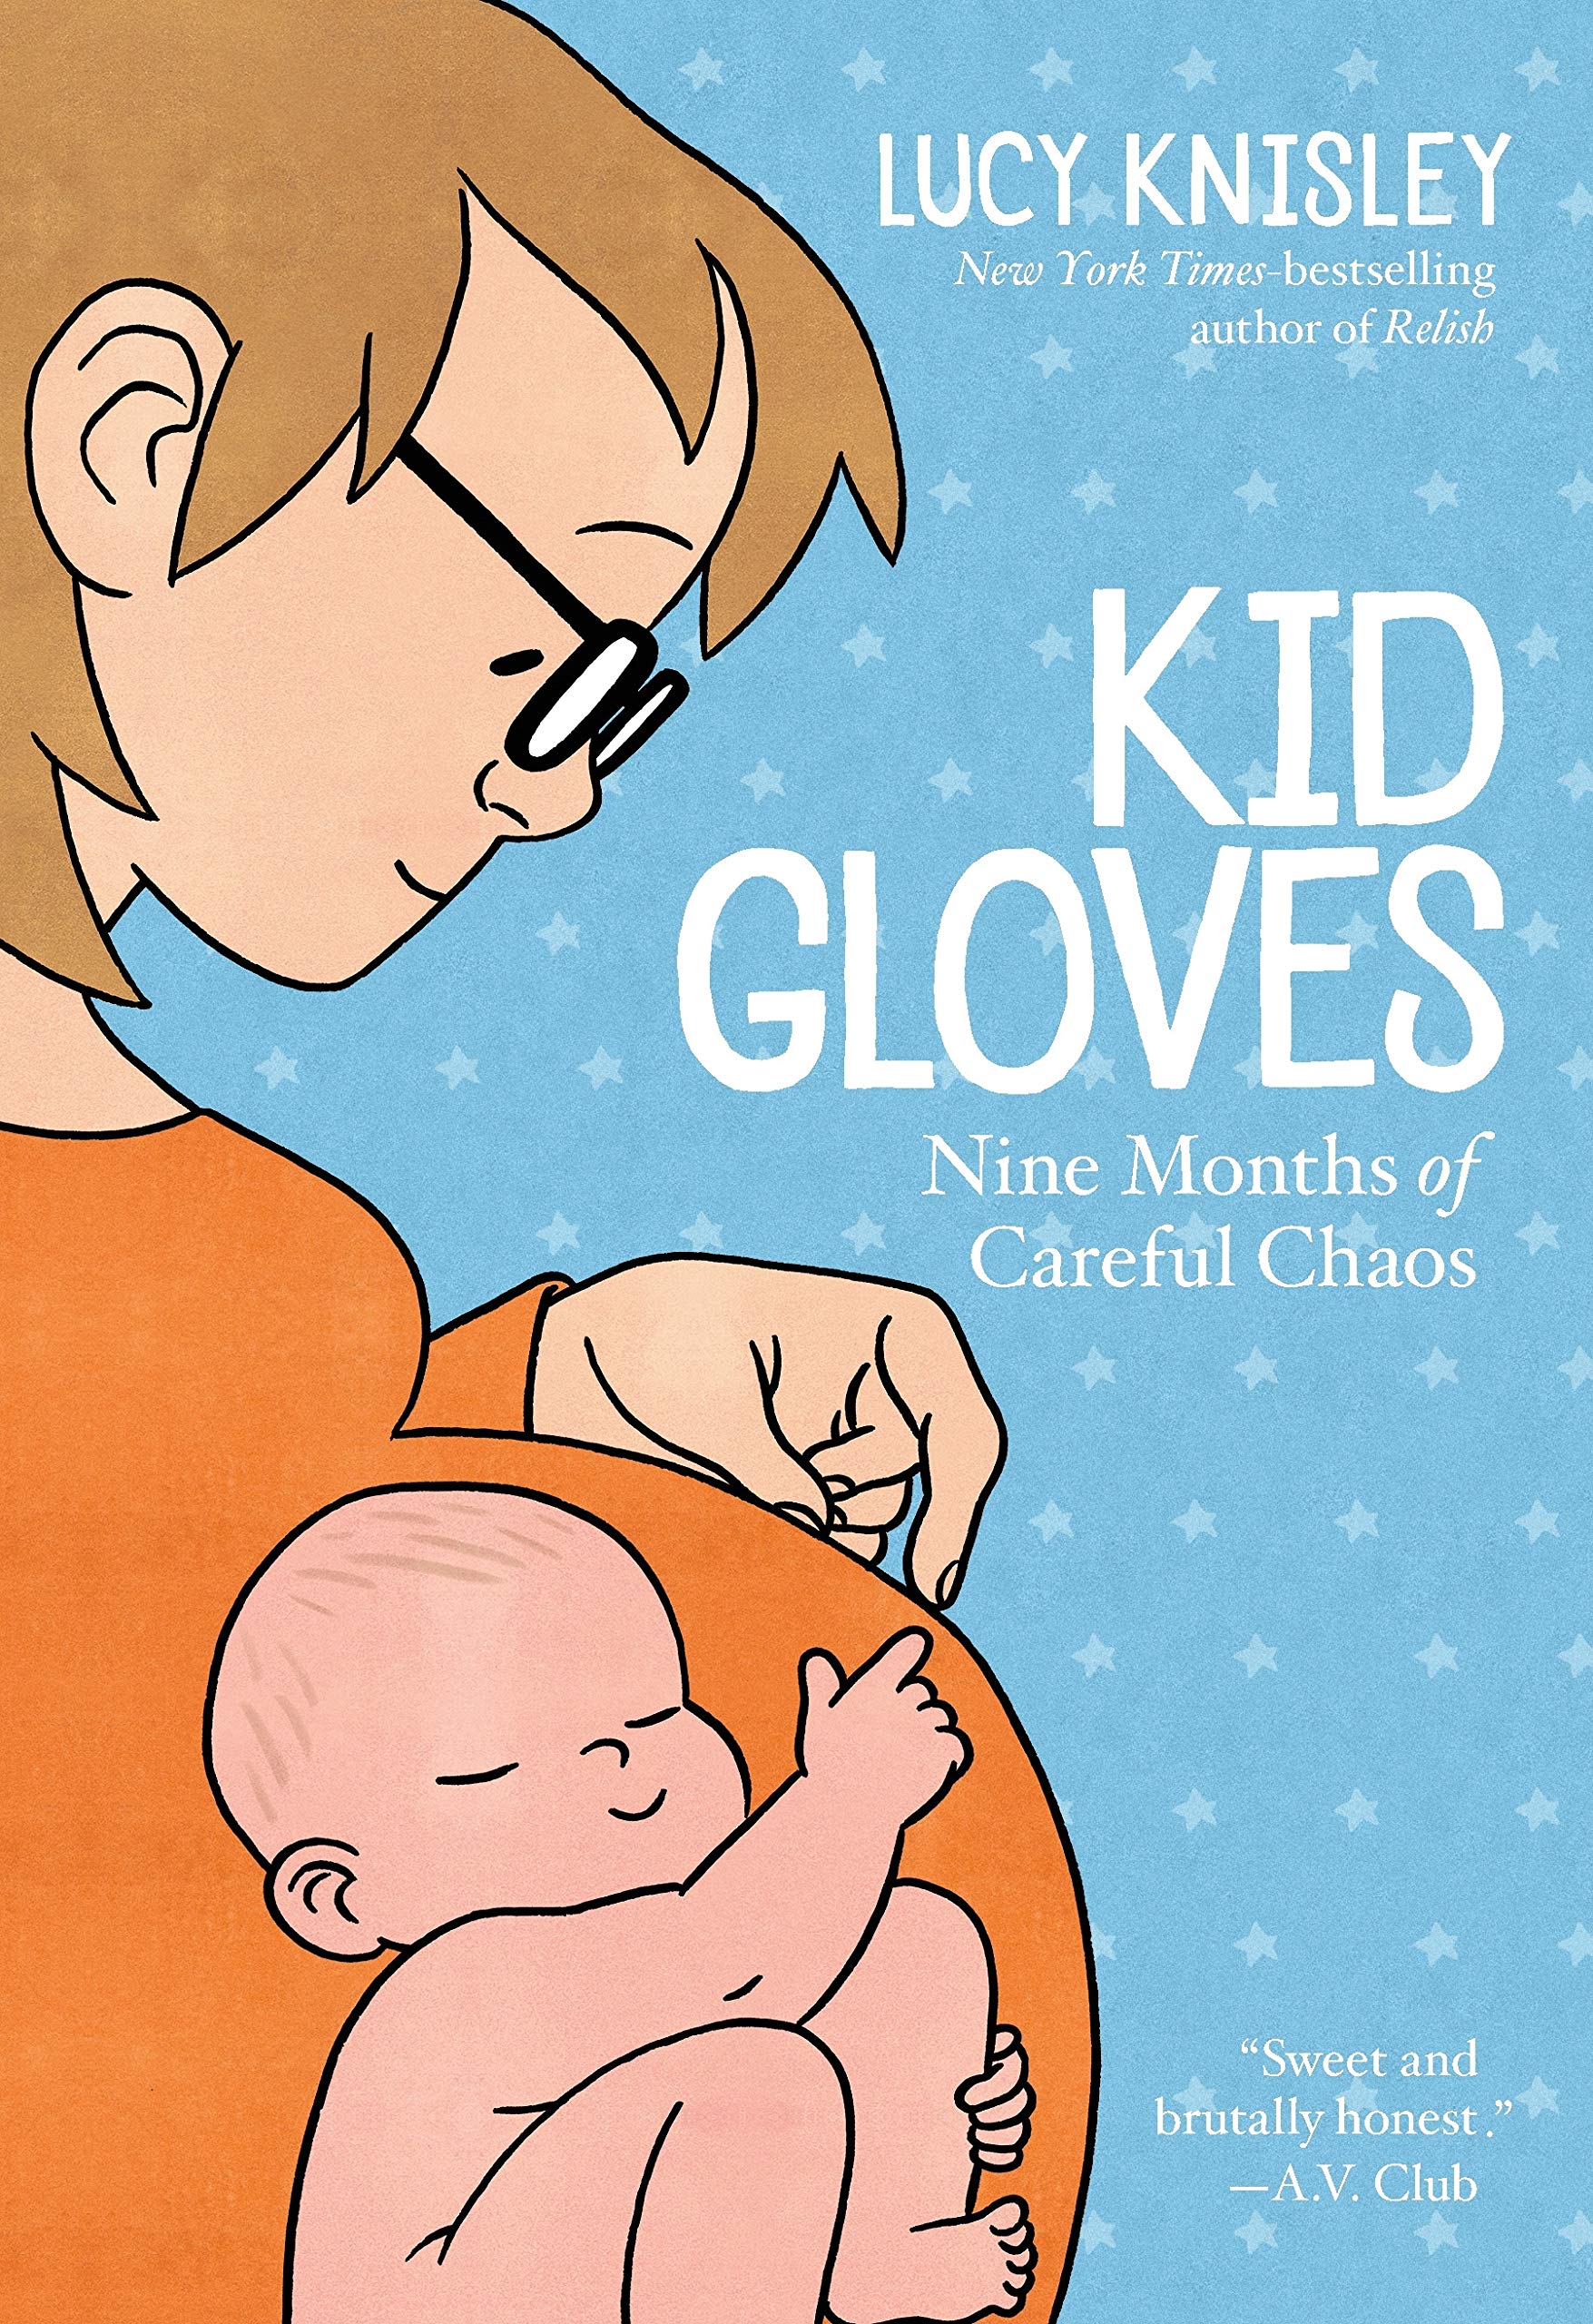 See Kid Gloves in Library Catalog